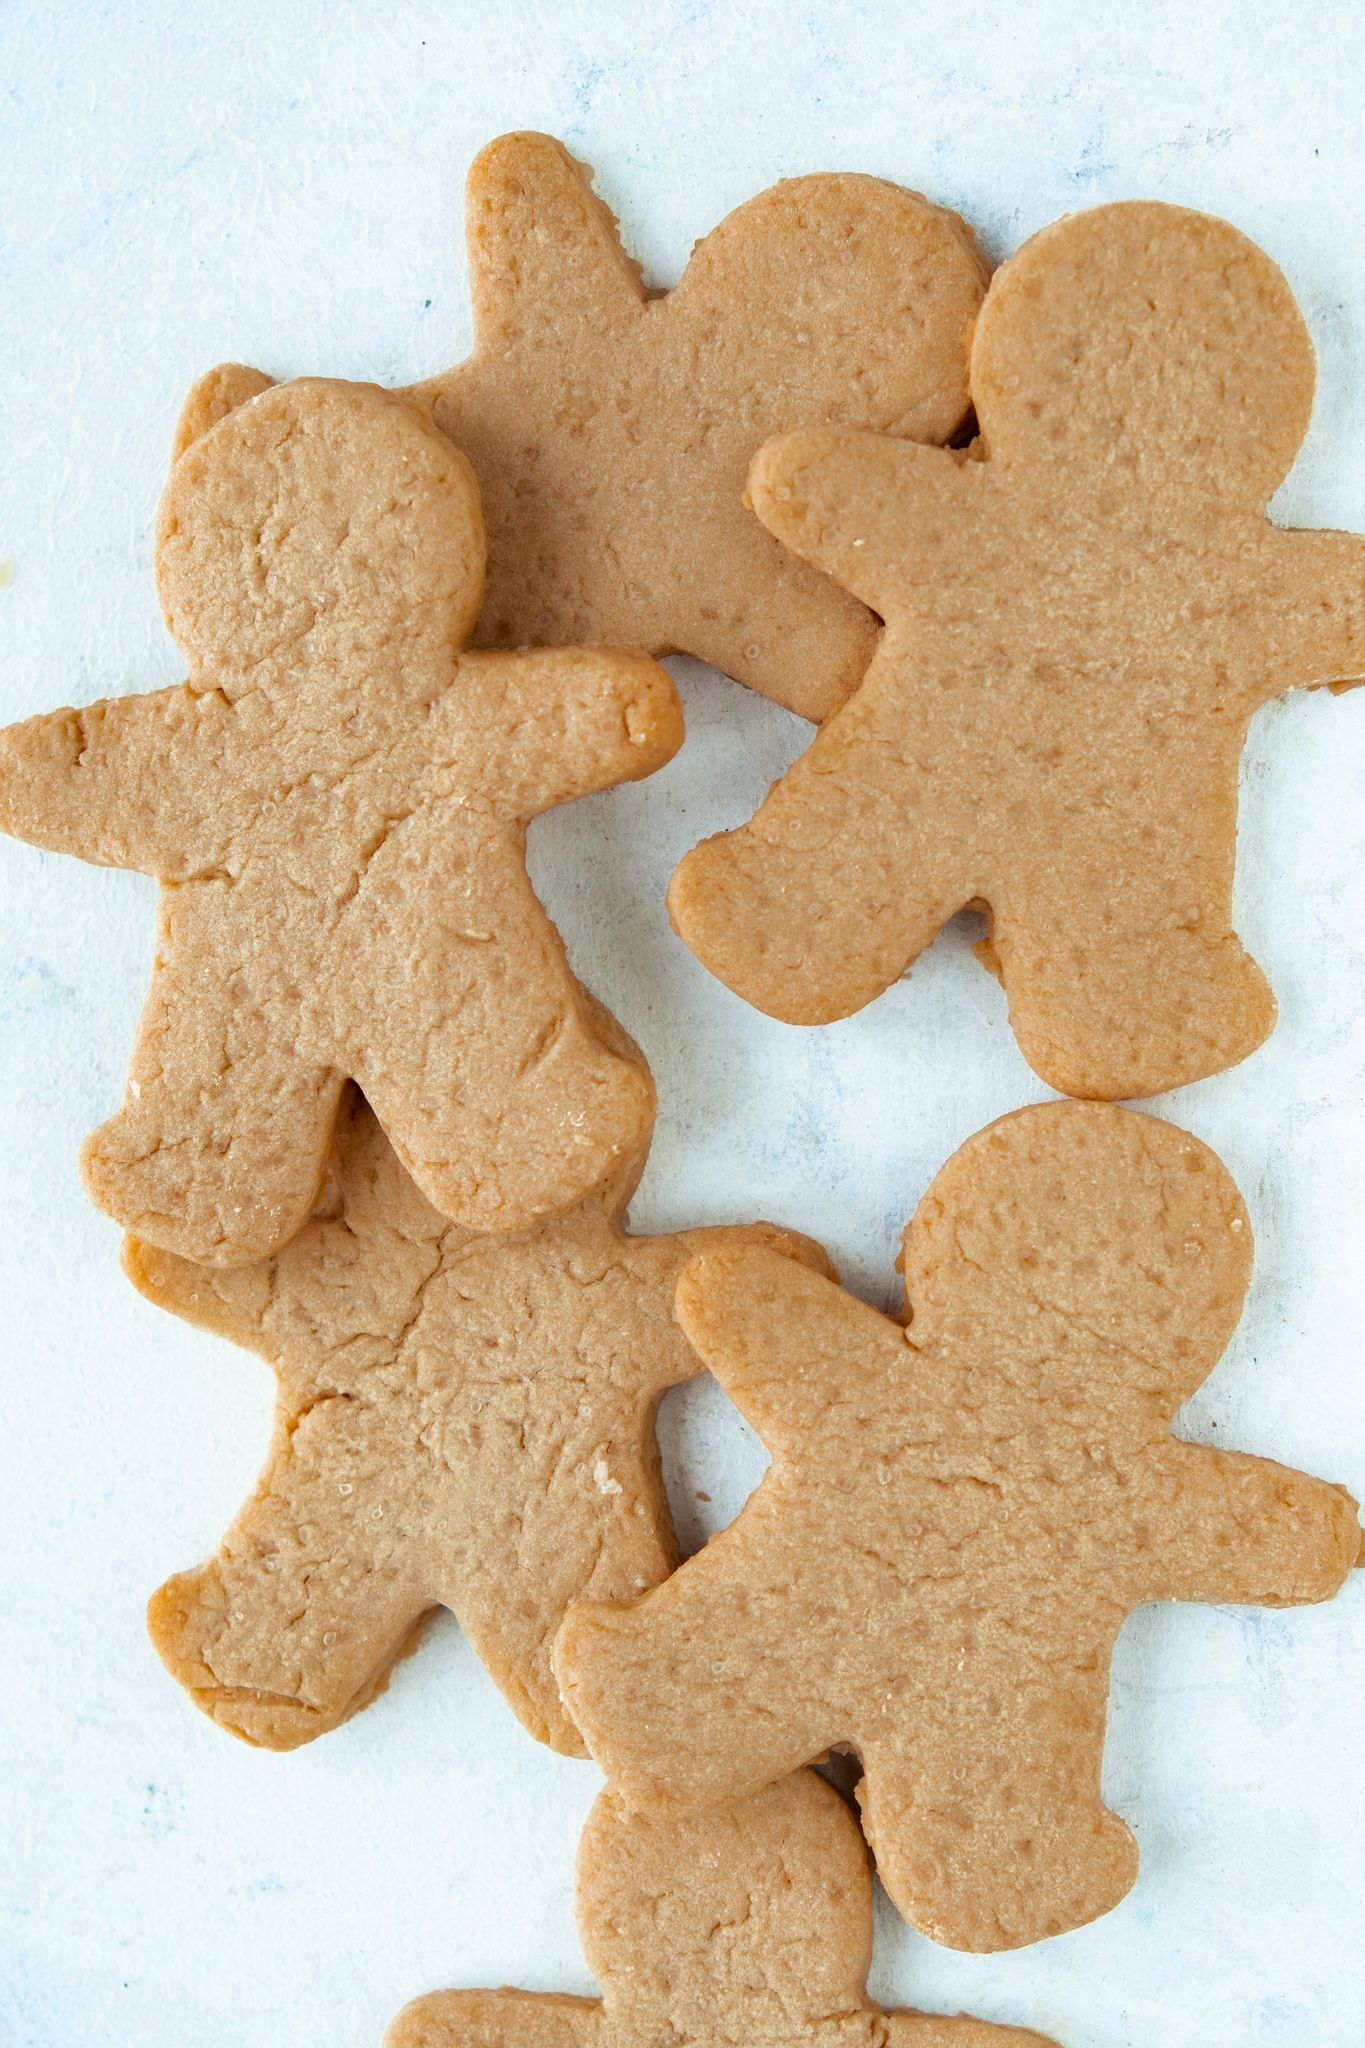 Gingerbread men cookies on a white surface